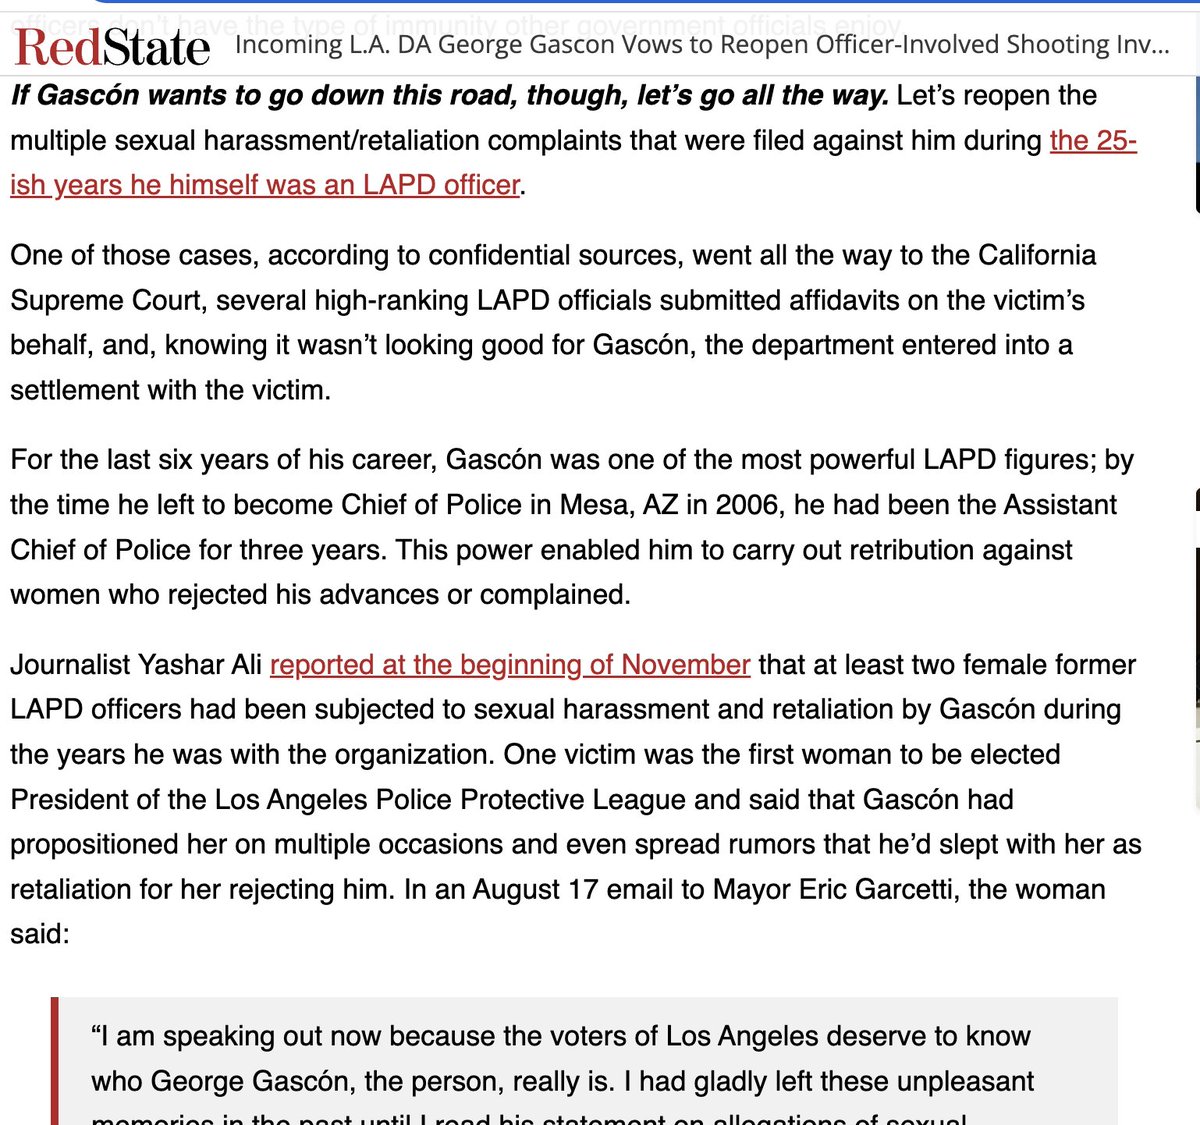 If George Gascón really cares about police accountability and thinks that access to personnel files is the way we get that accountability - let's start with HIS file from his 20+ years as an LAPD officer. MULTIPLE sexual harassment/retaliation claims were filed against him.